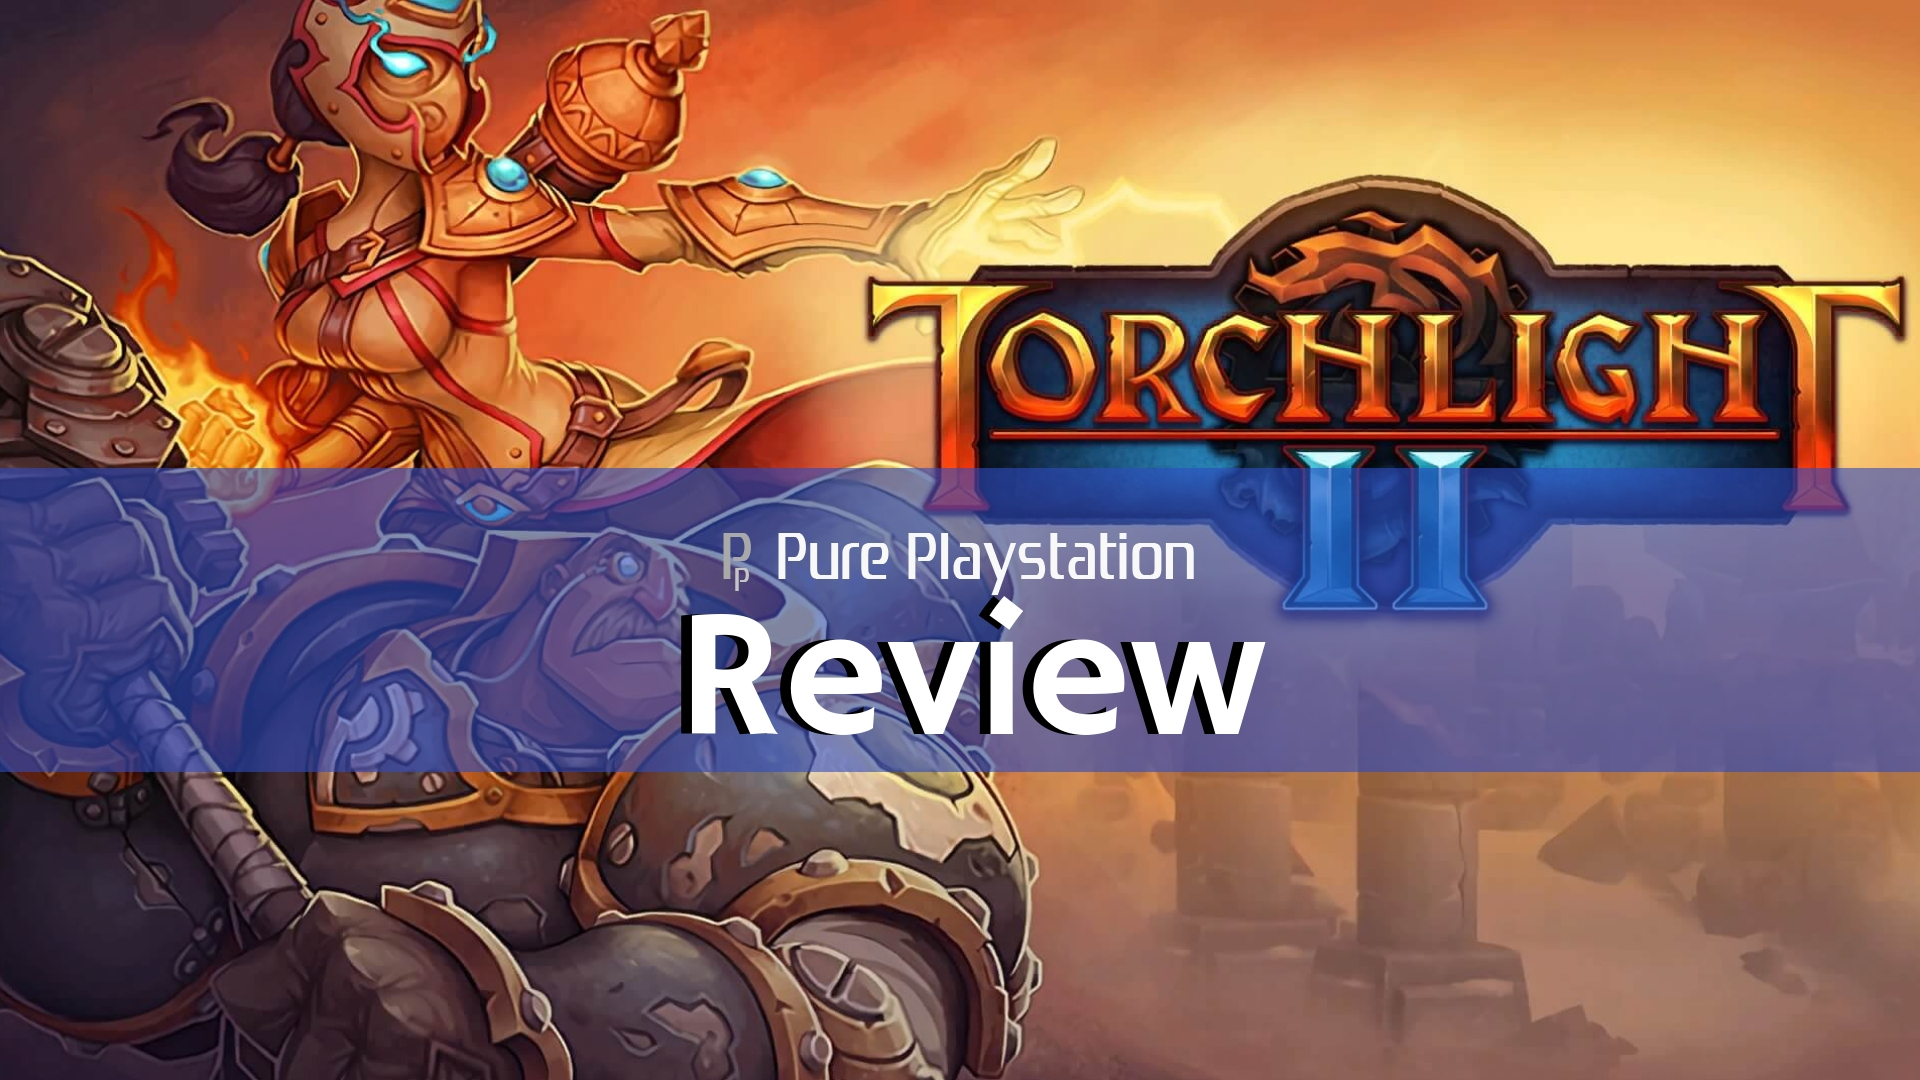 Review: Torchlight 2 - PS4